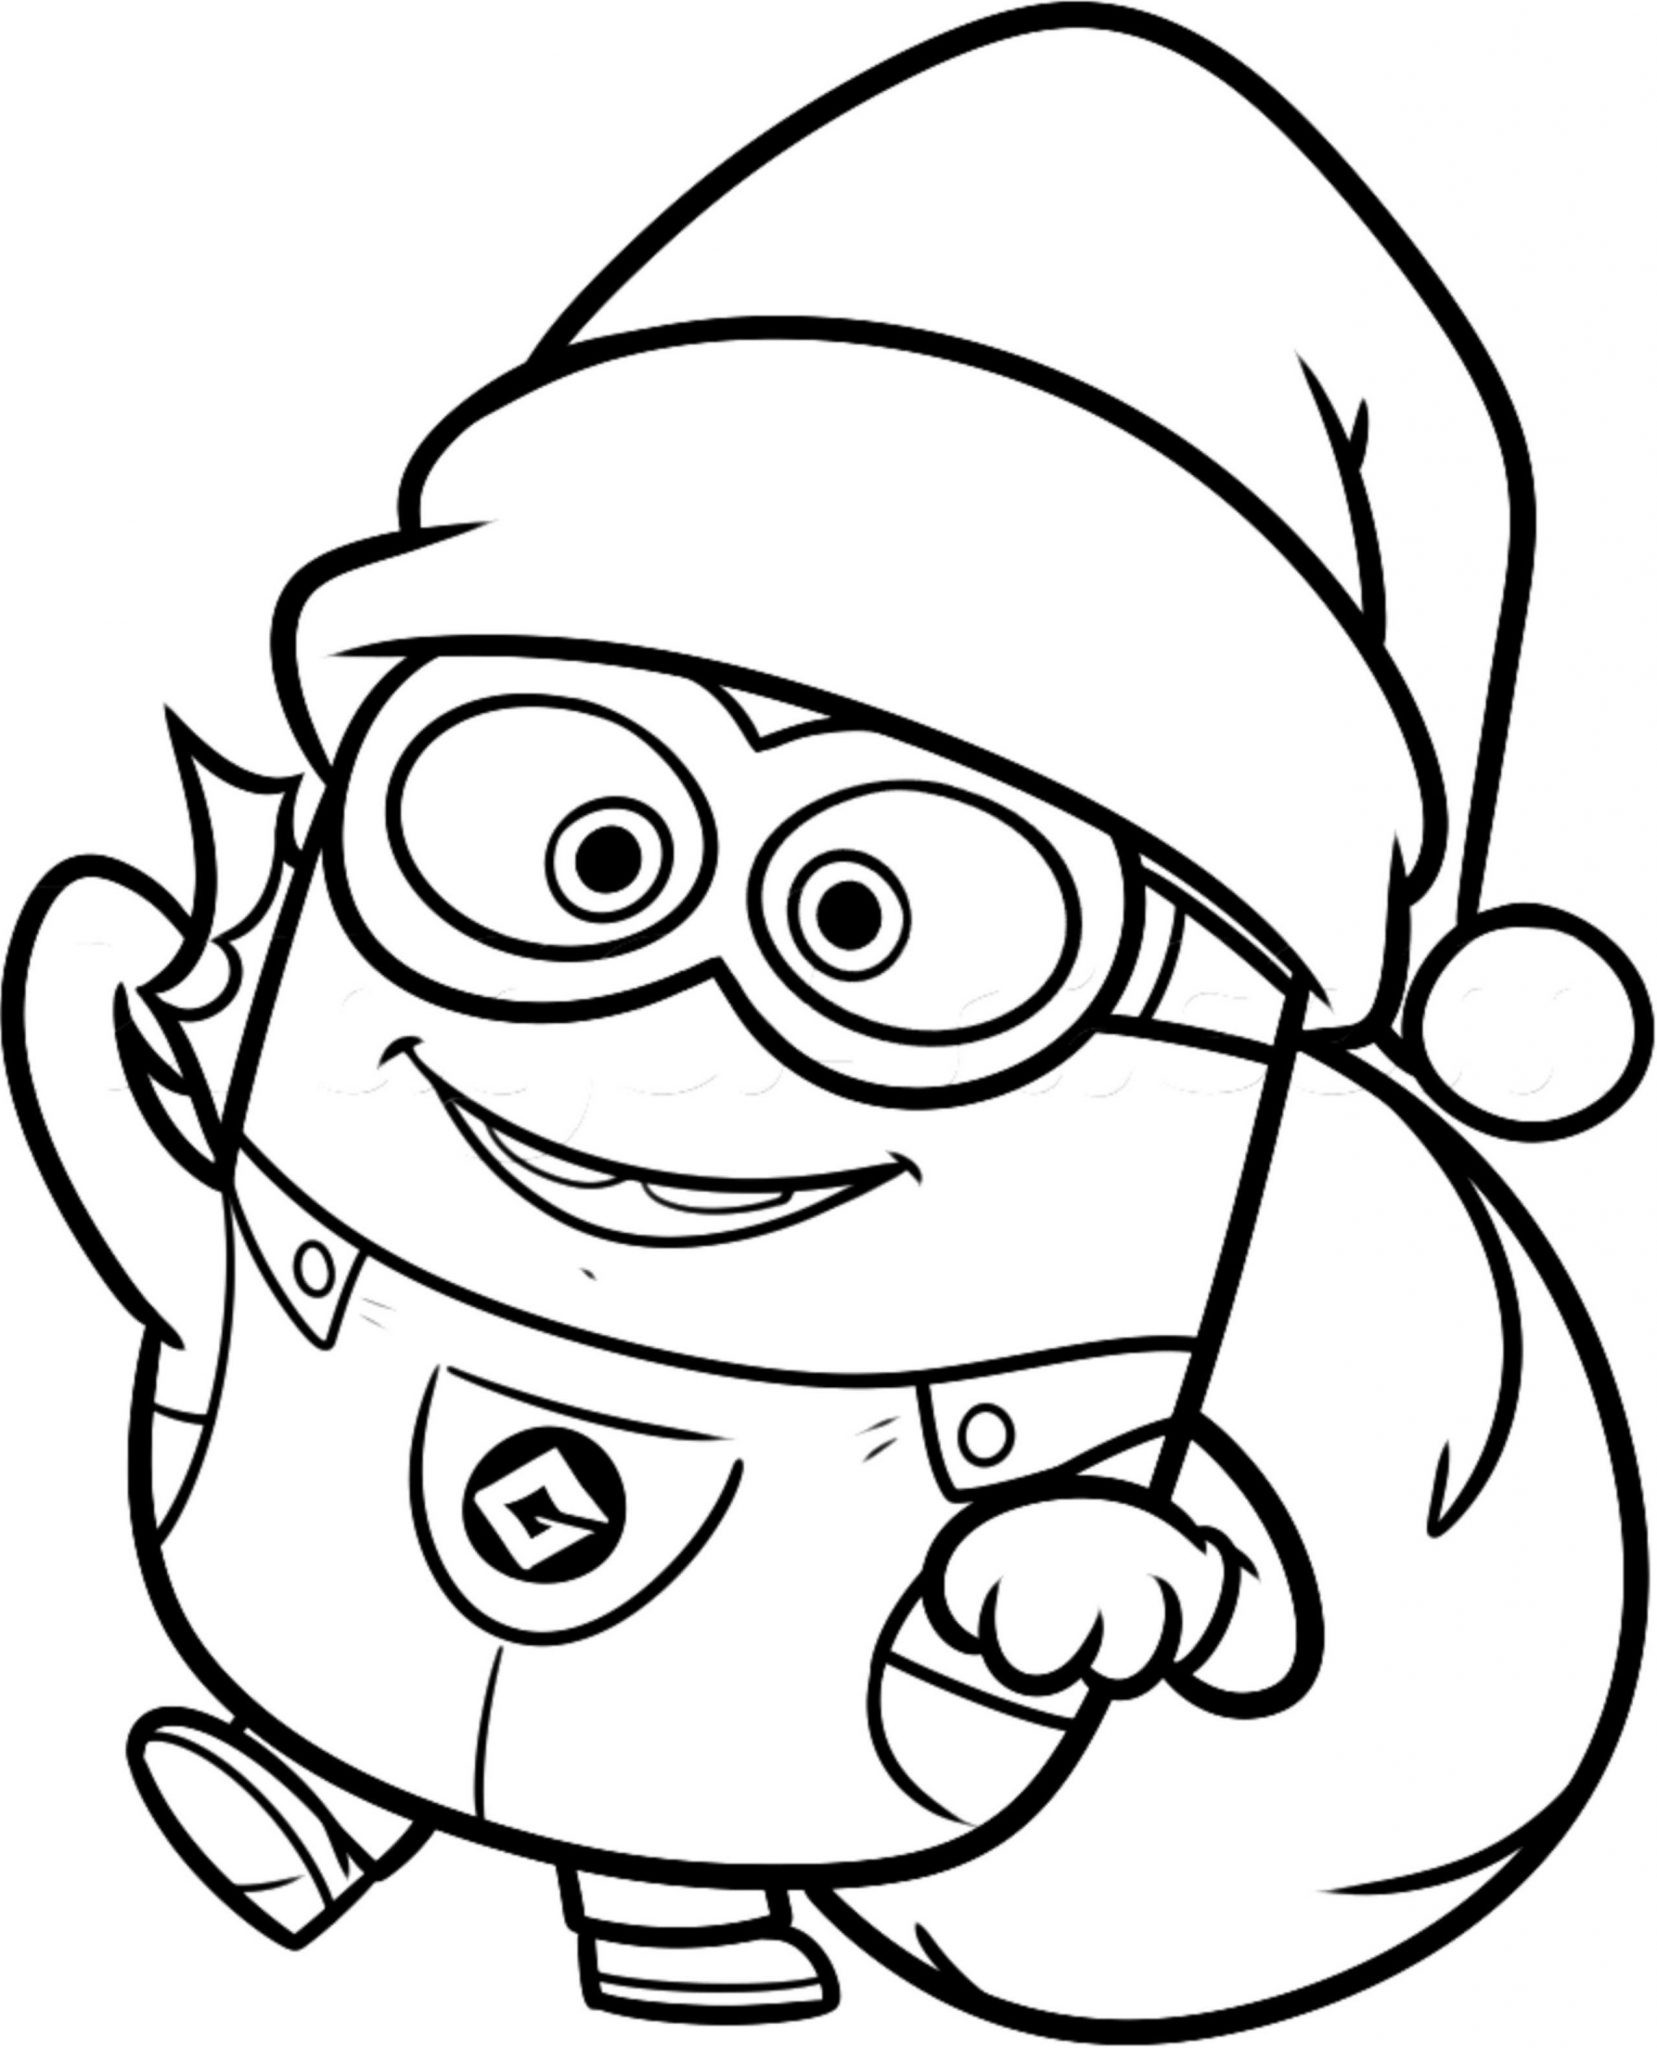 Minions Coloring Pages To Print
 Print & Download Minion Coloring Pages for Kids to Have